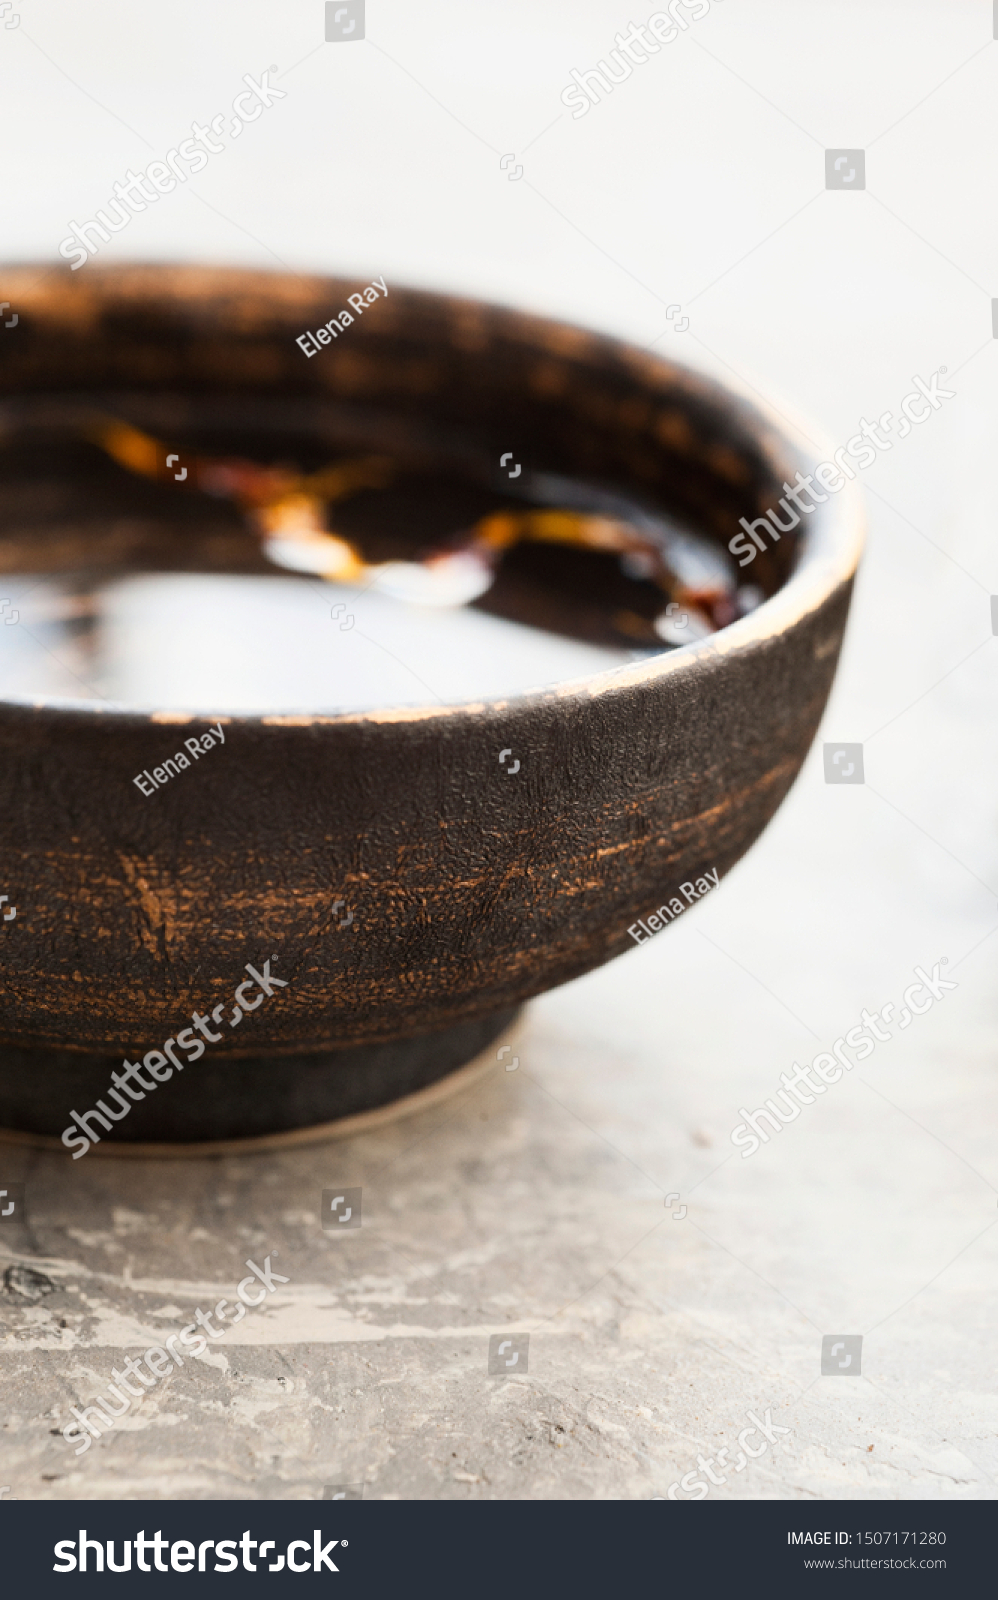 Pure water with organic leaf elements in a beautiful ceramic bowl. Still Life Photography. #1507171280